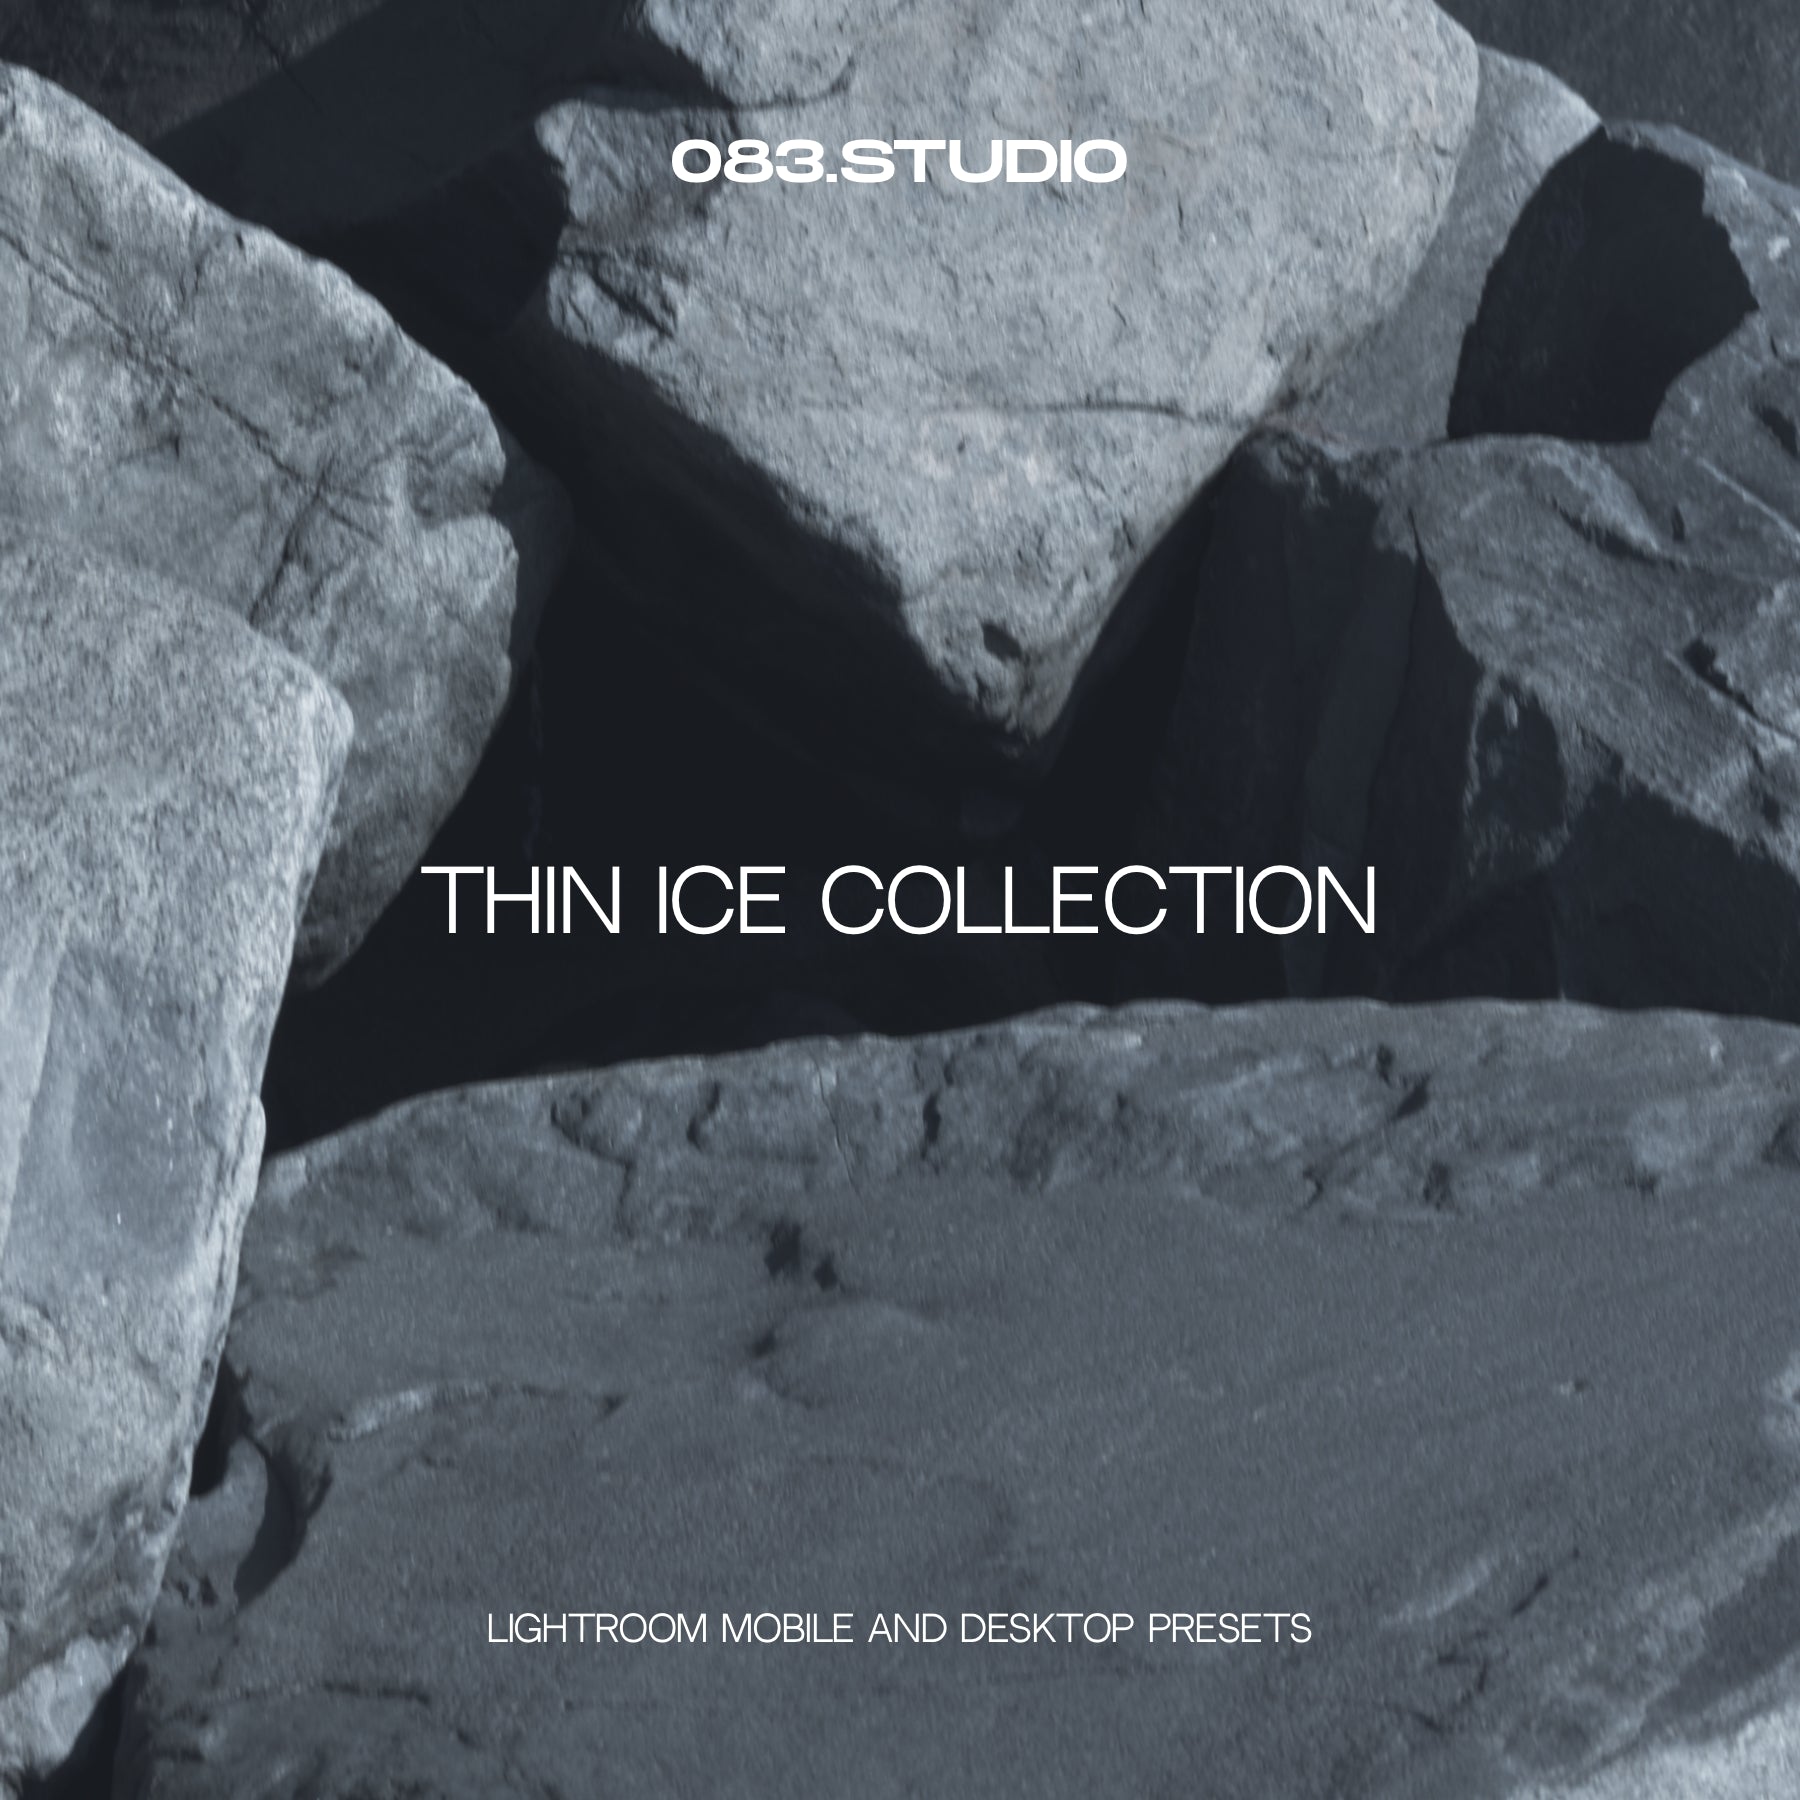 THIN ICE COLLECTION